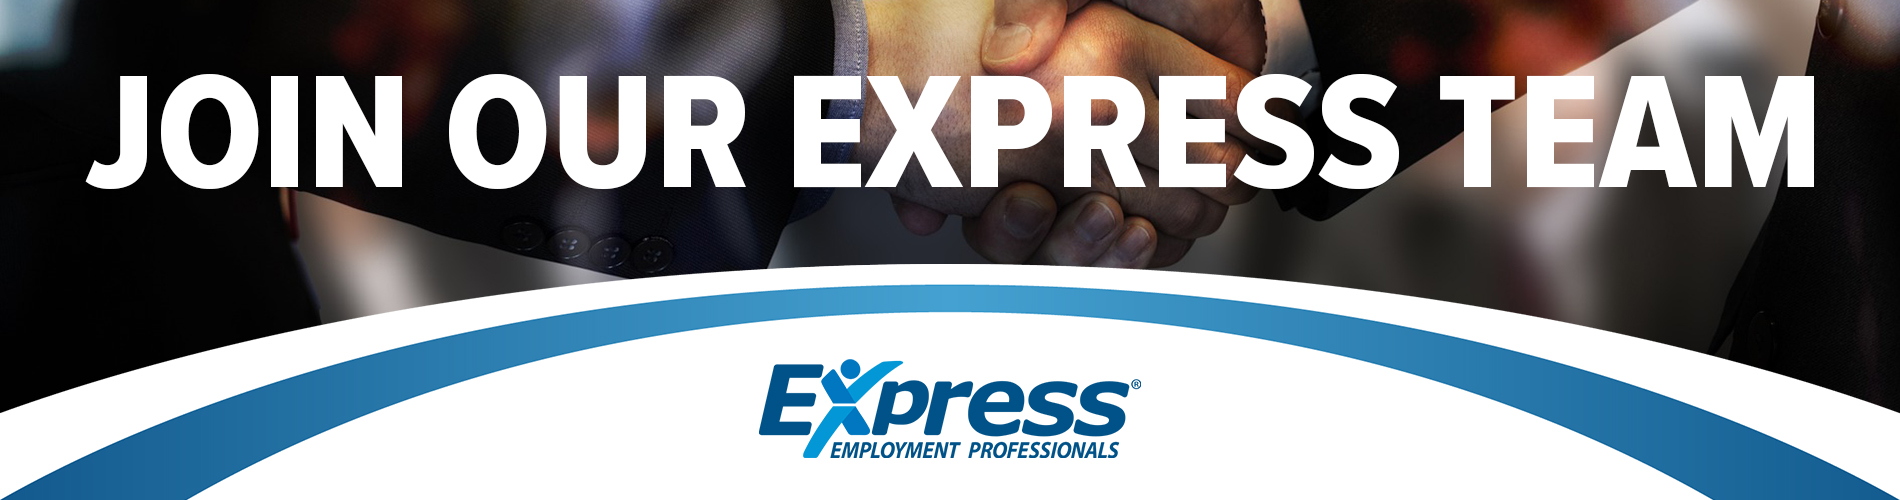 Join Our Express Team, Staffing Industry Jobs in Peoria, AZ